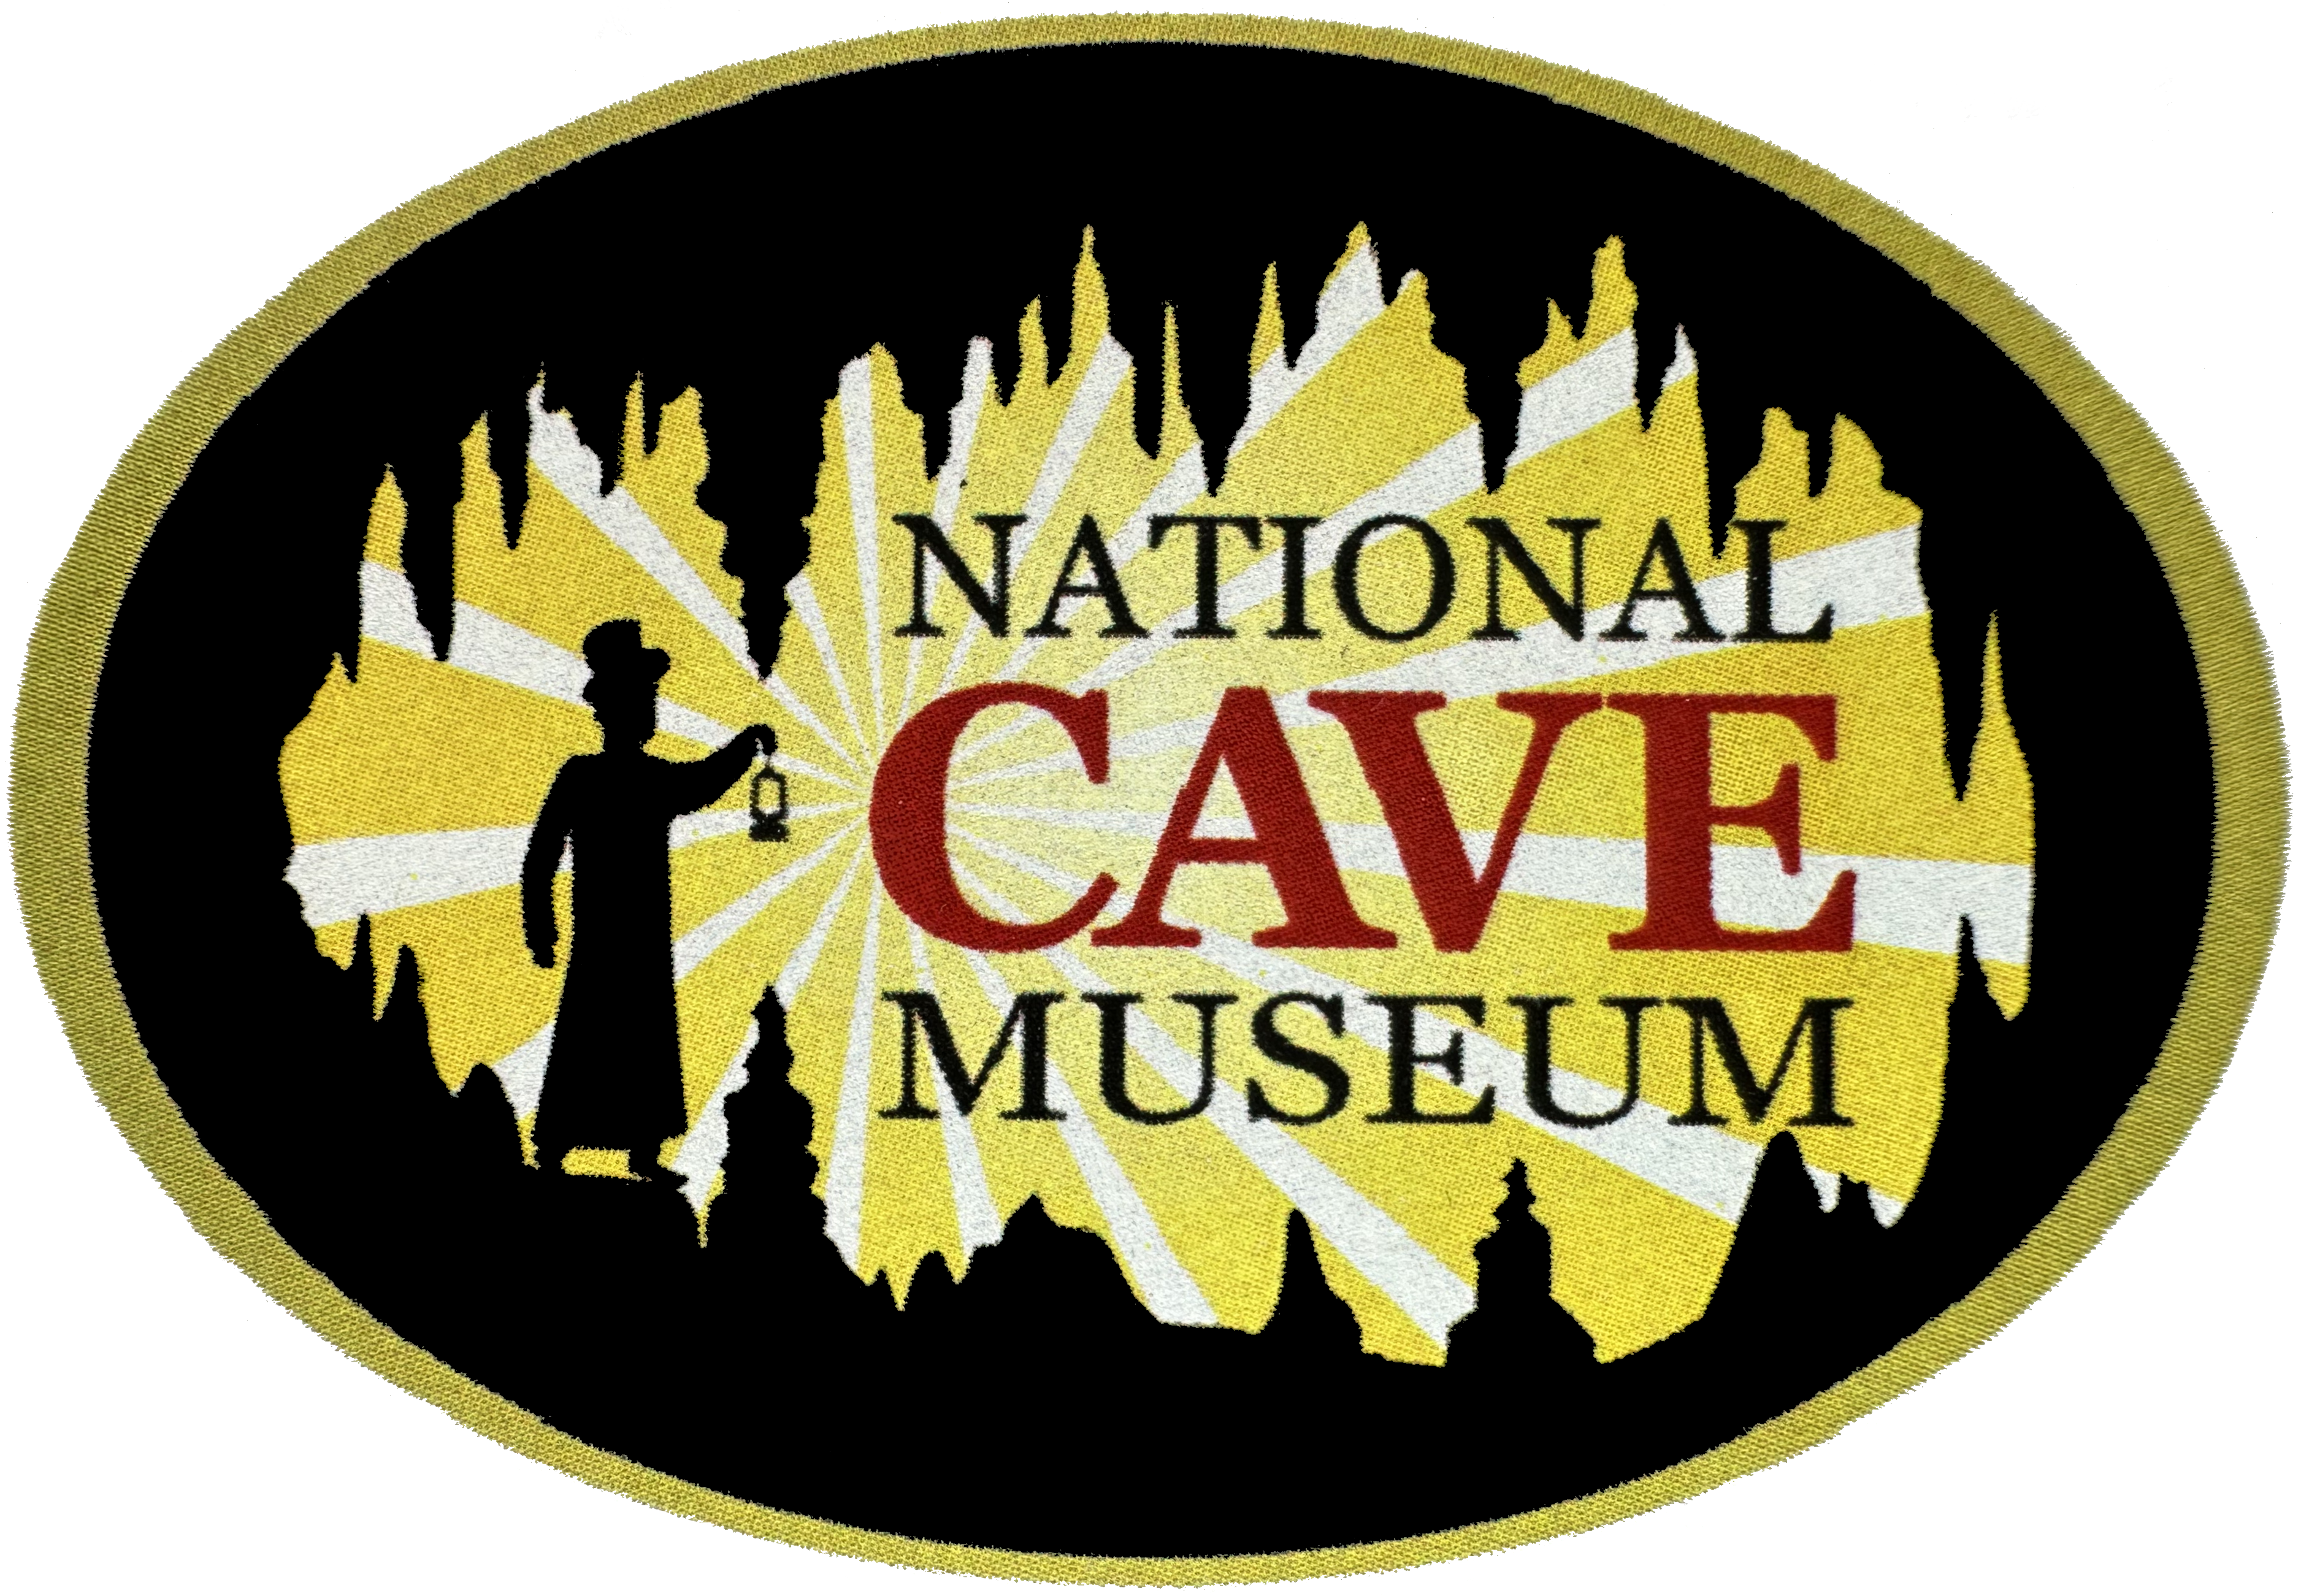        National Cave Museum